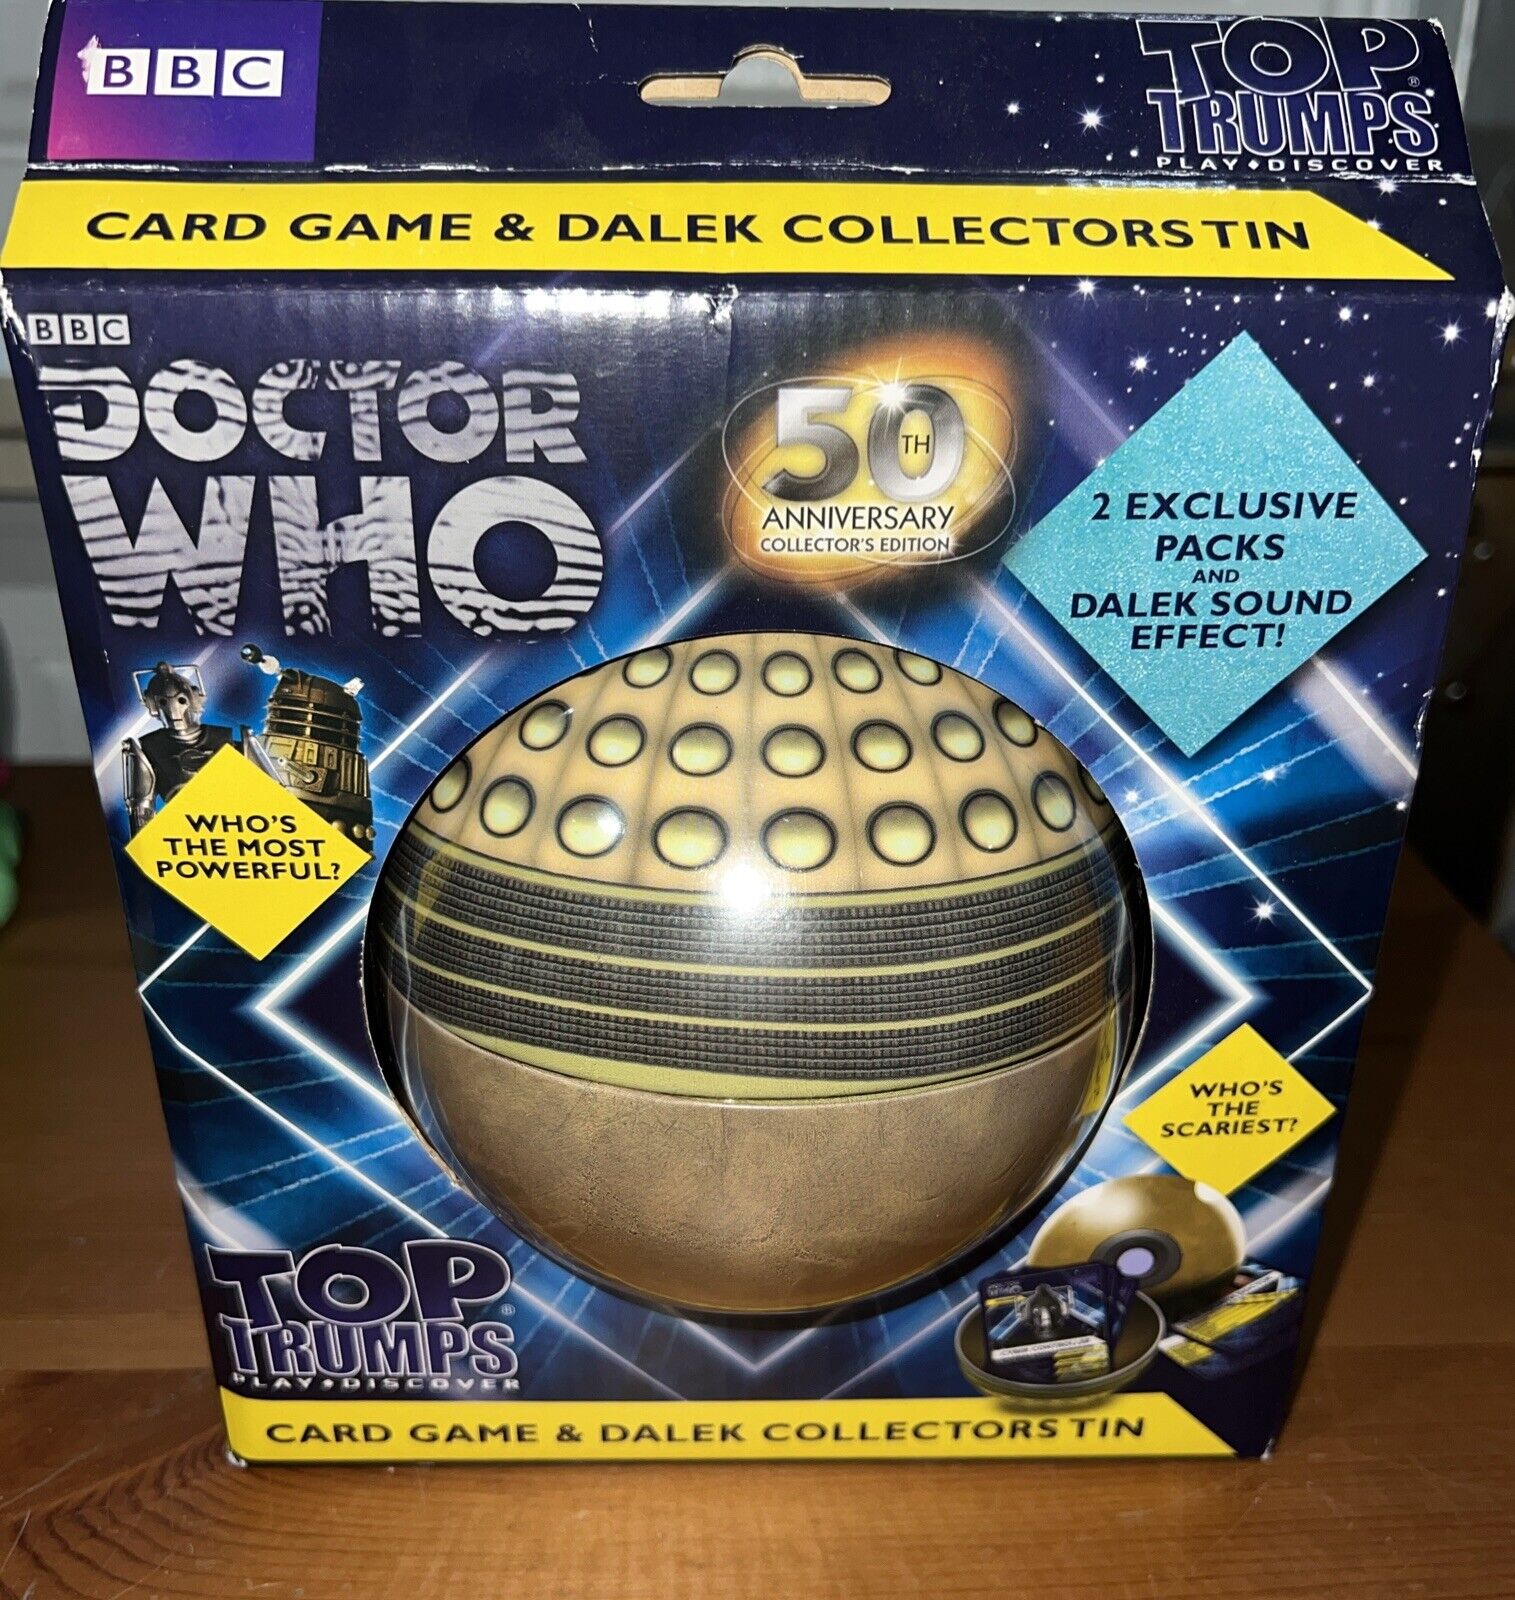 BBC DOCTOR WHO TOP TRUMPS PLAY DISCOVER CARD GAME & DALEK COLLECTORS TIN MINT